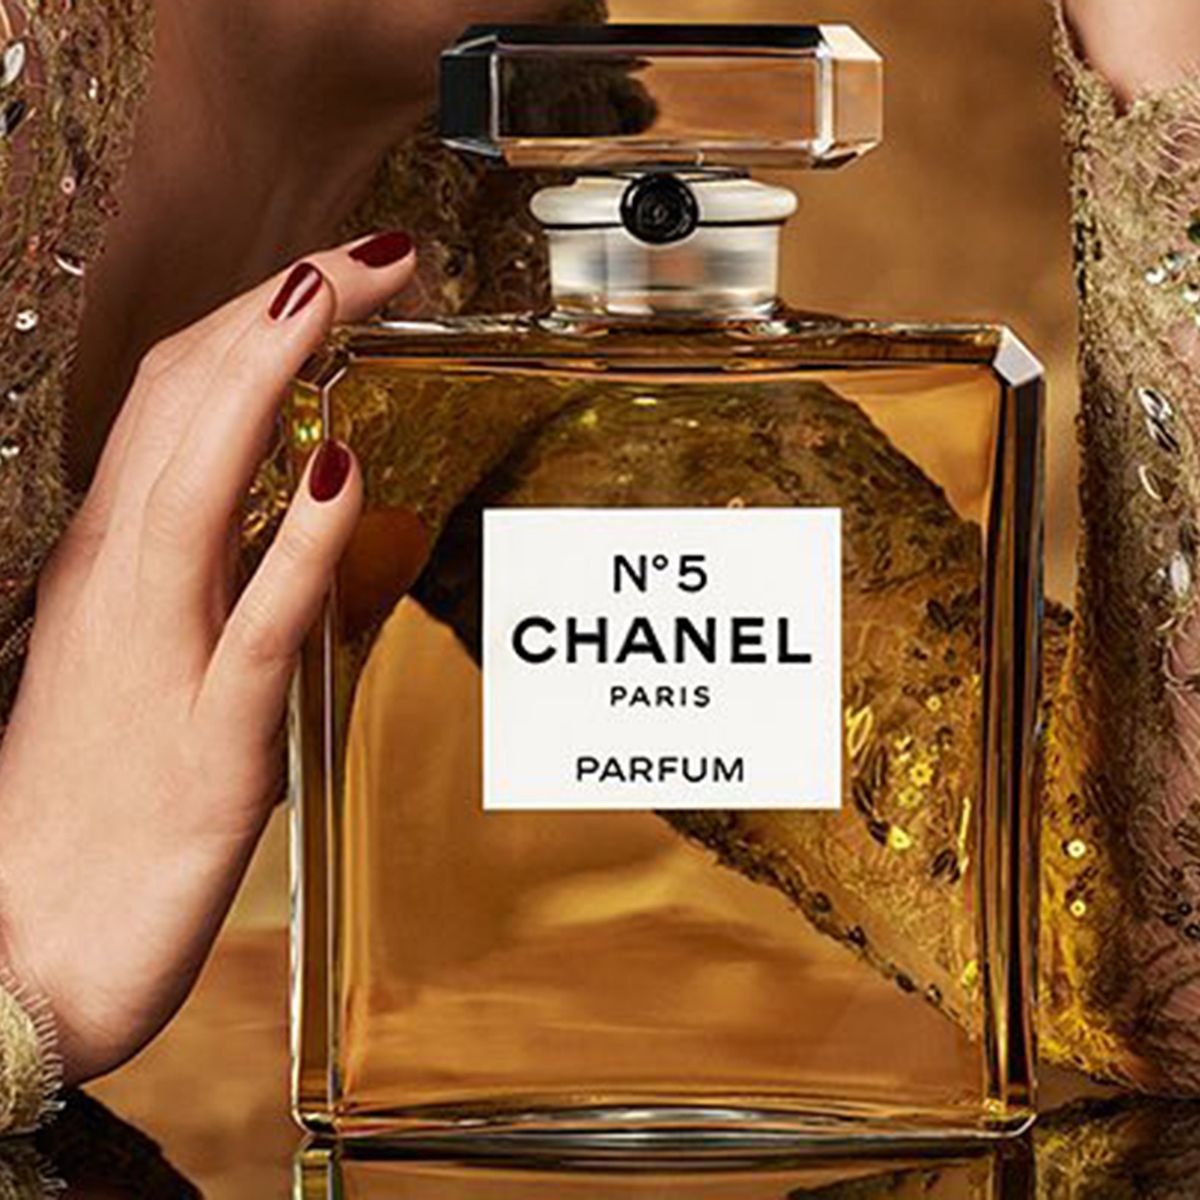 Chanel No. 5 100 years on: 'Smell like a woman, not a rose' - 9Style